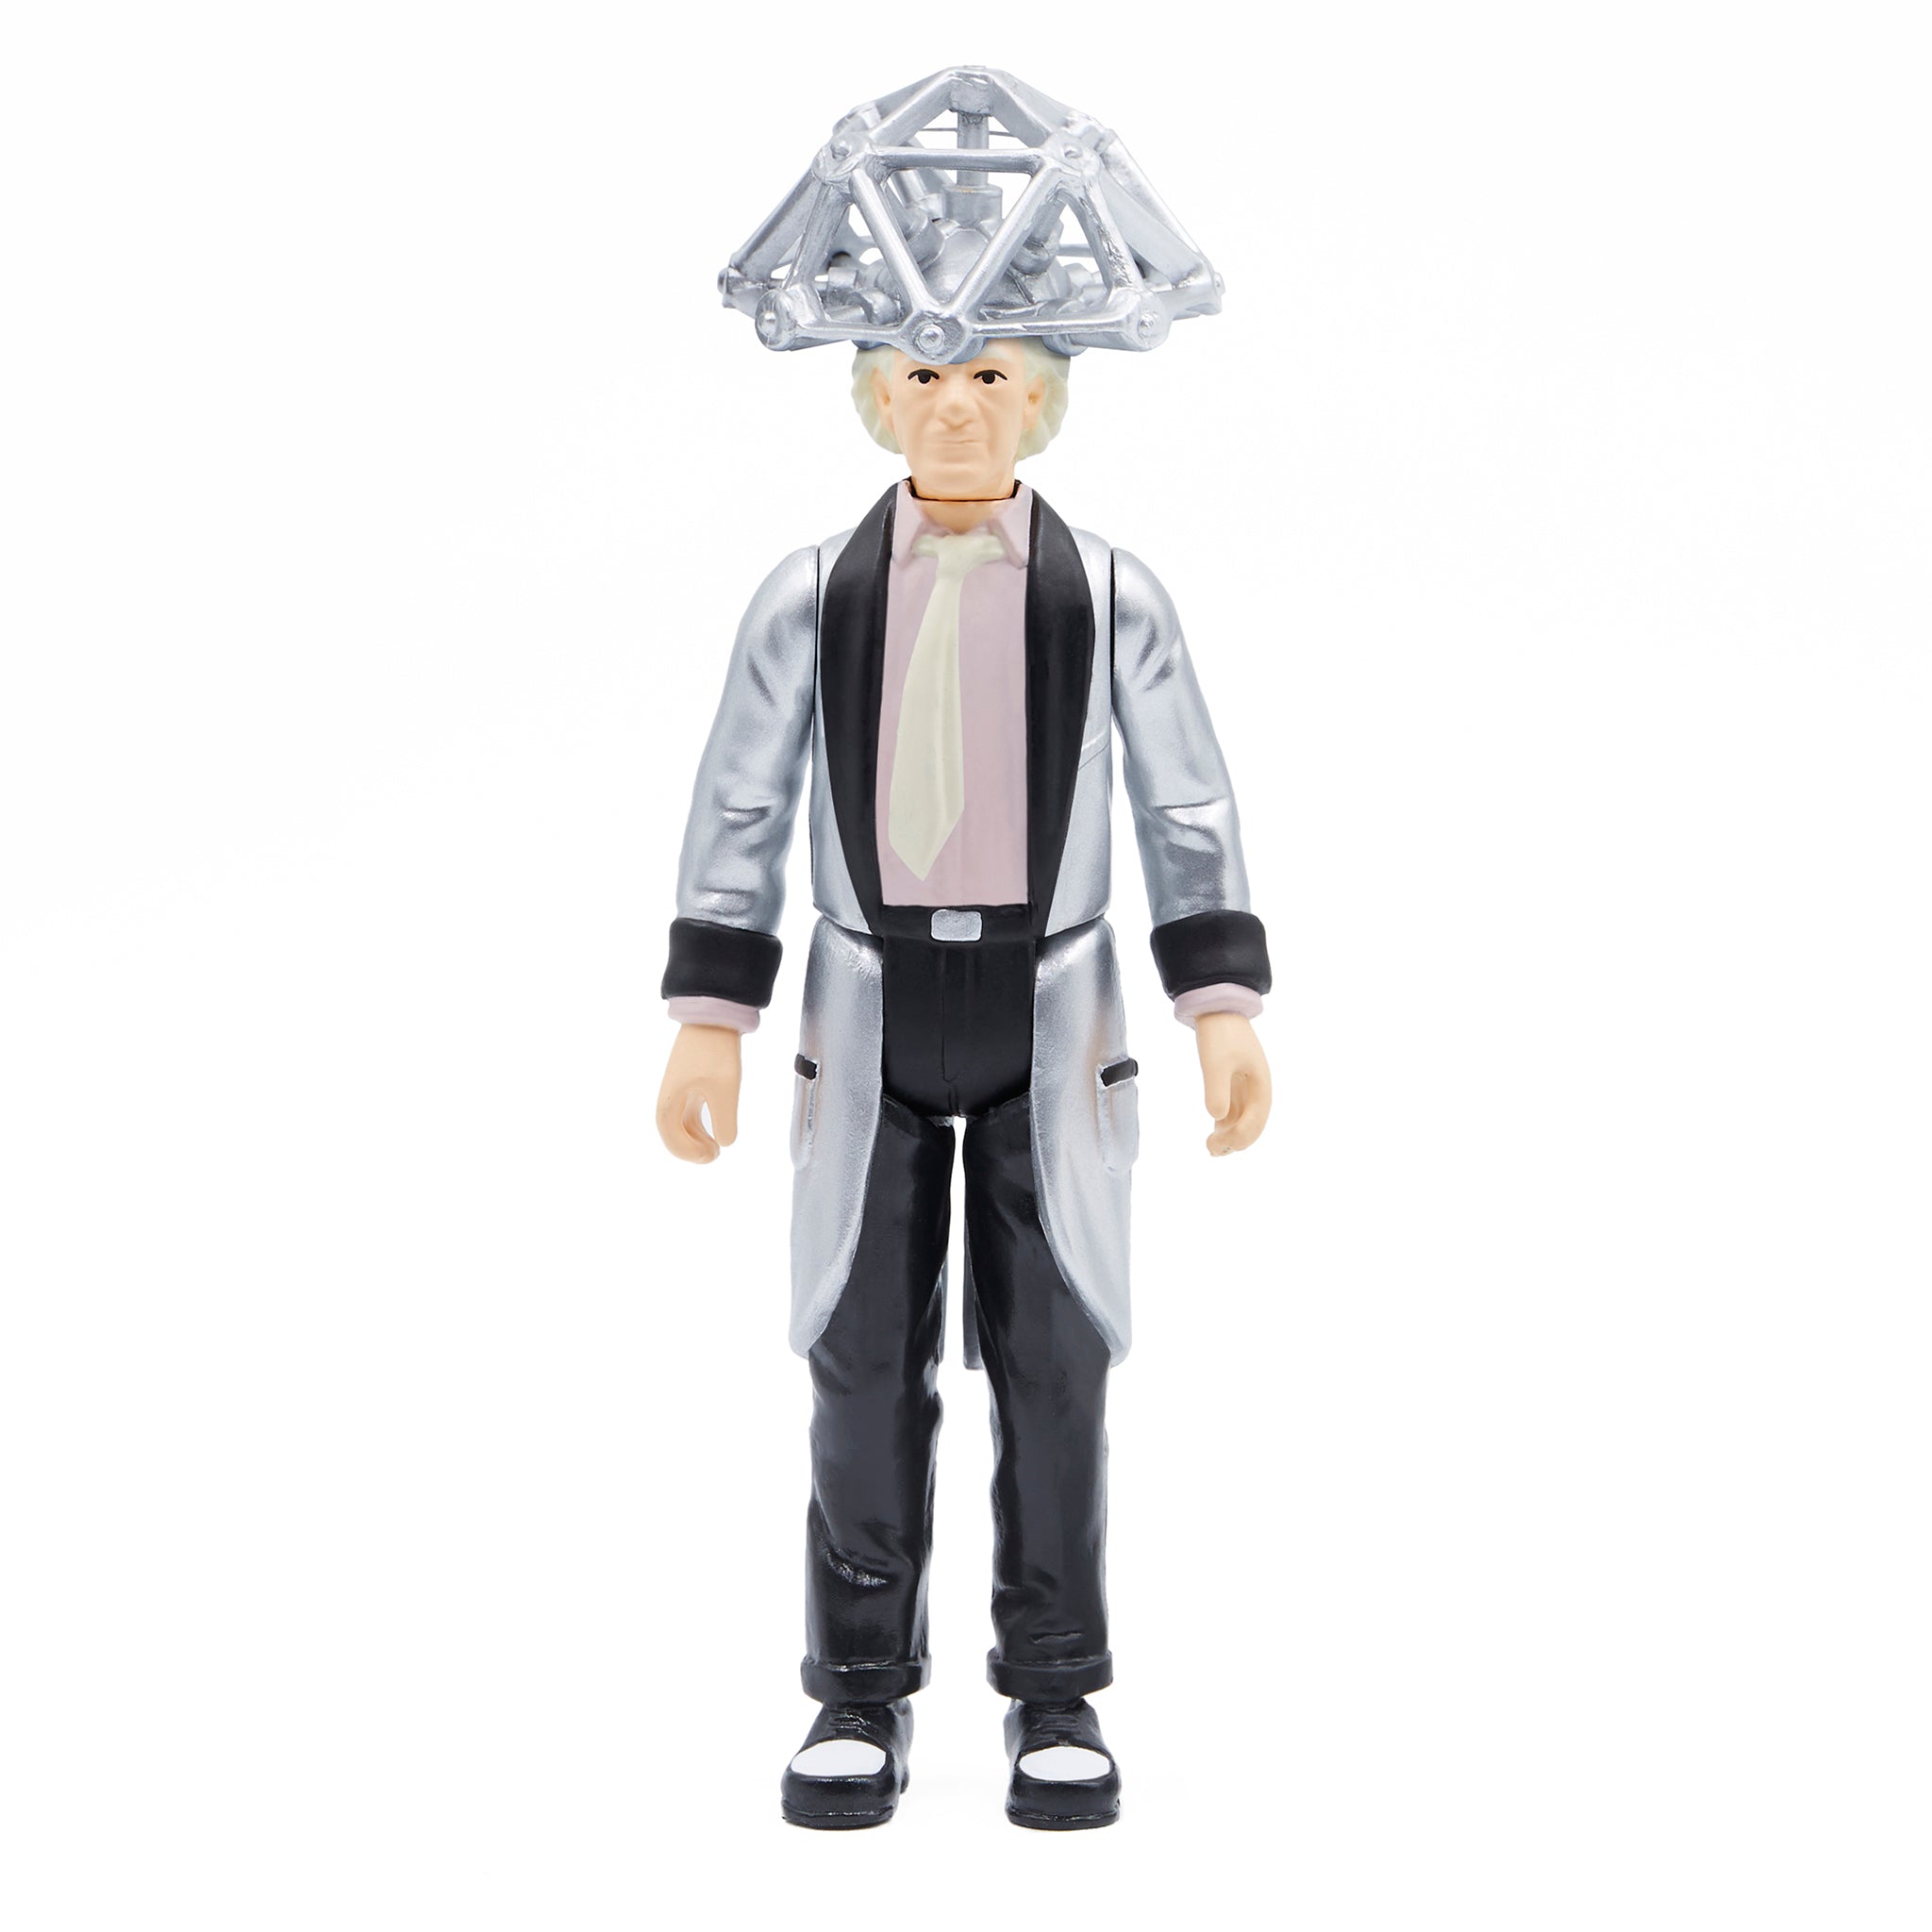 Back to the Future ReAction Figure Wave 2 - Fifties Doc